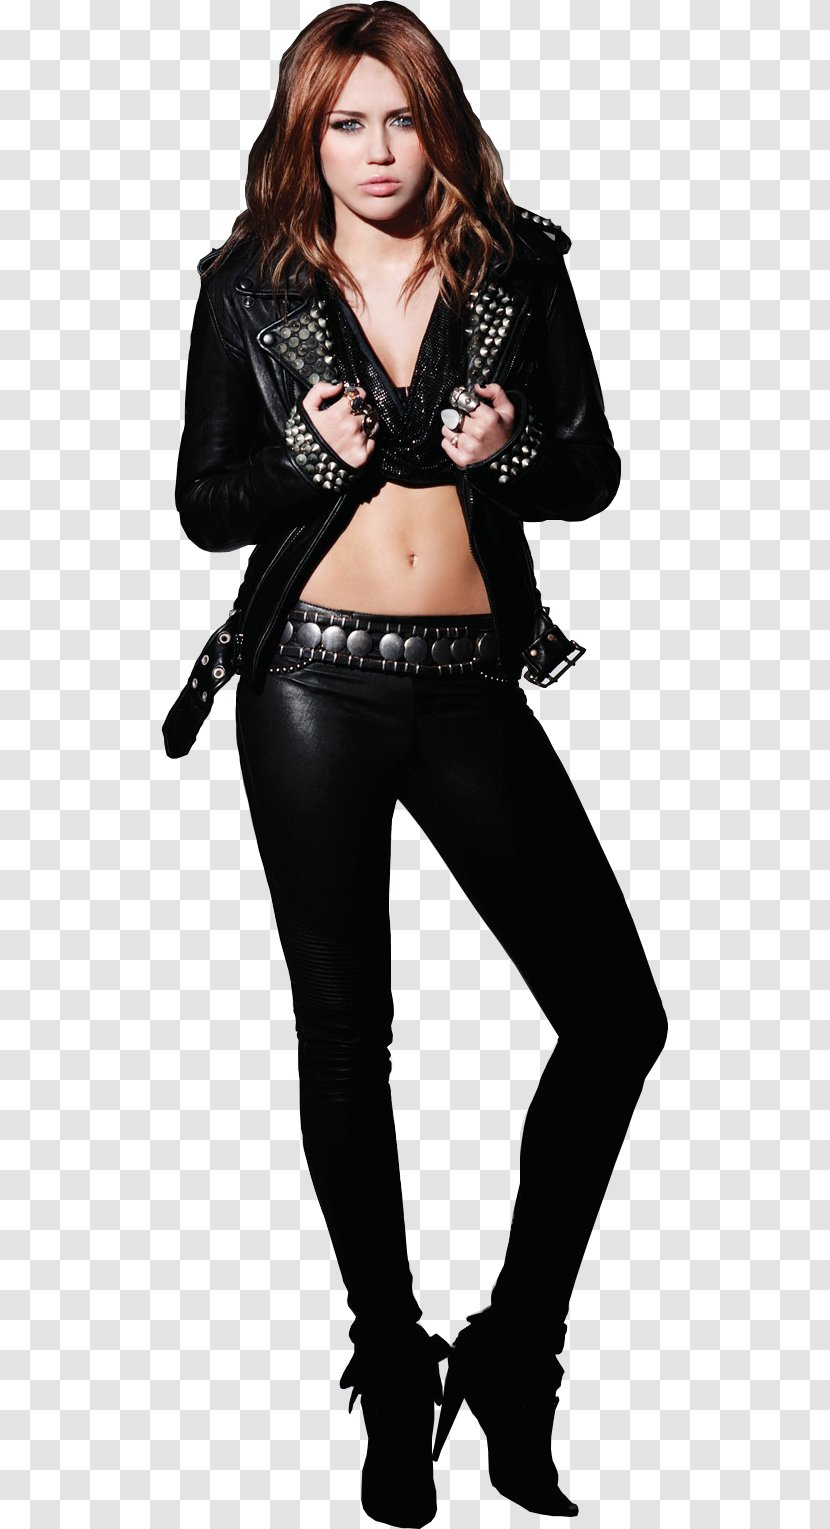 Miley Cyrus Can't Be Tamed Musician Photo Shoot Album - Cartoon Transparent PNG